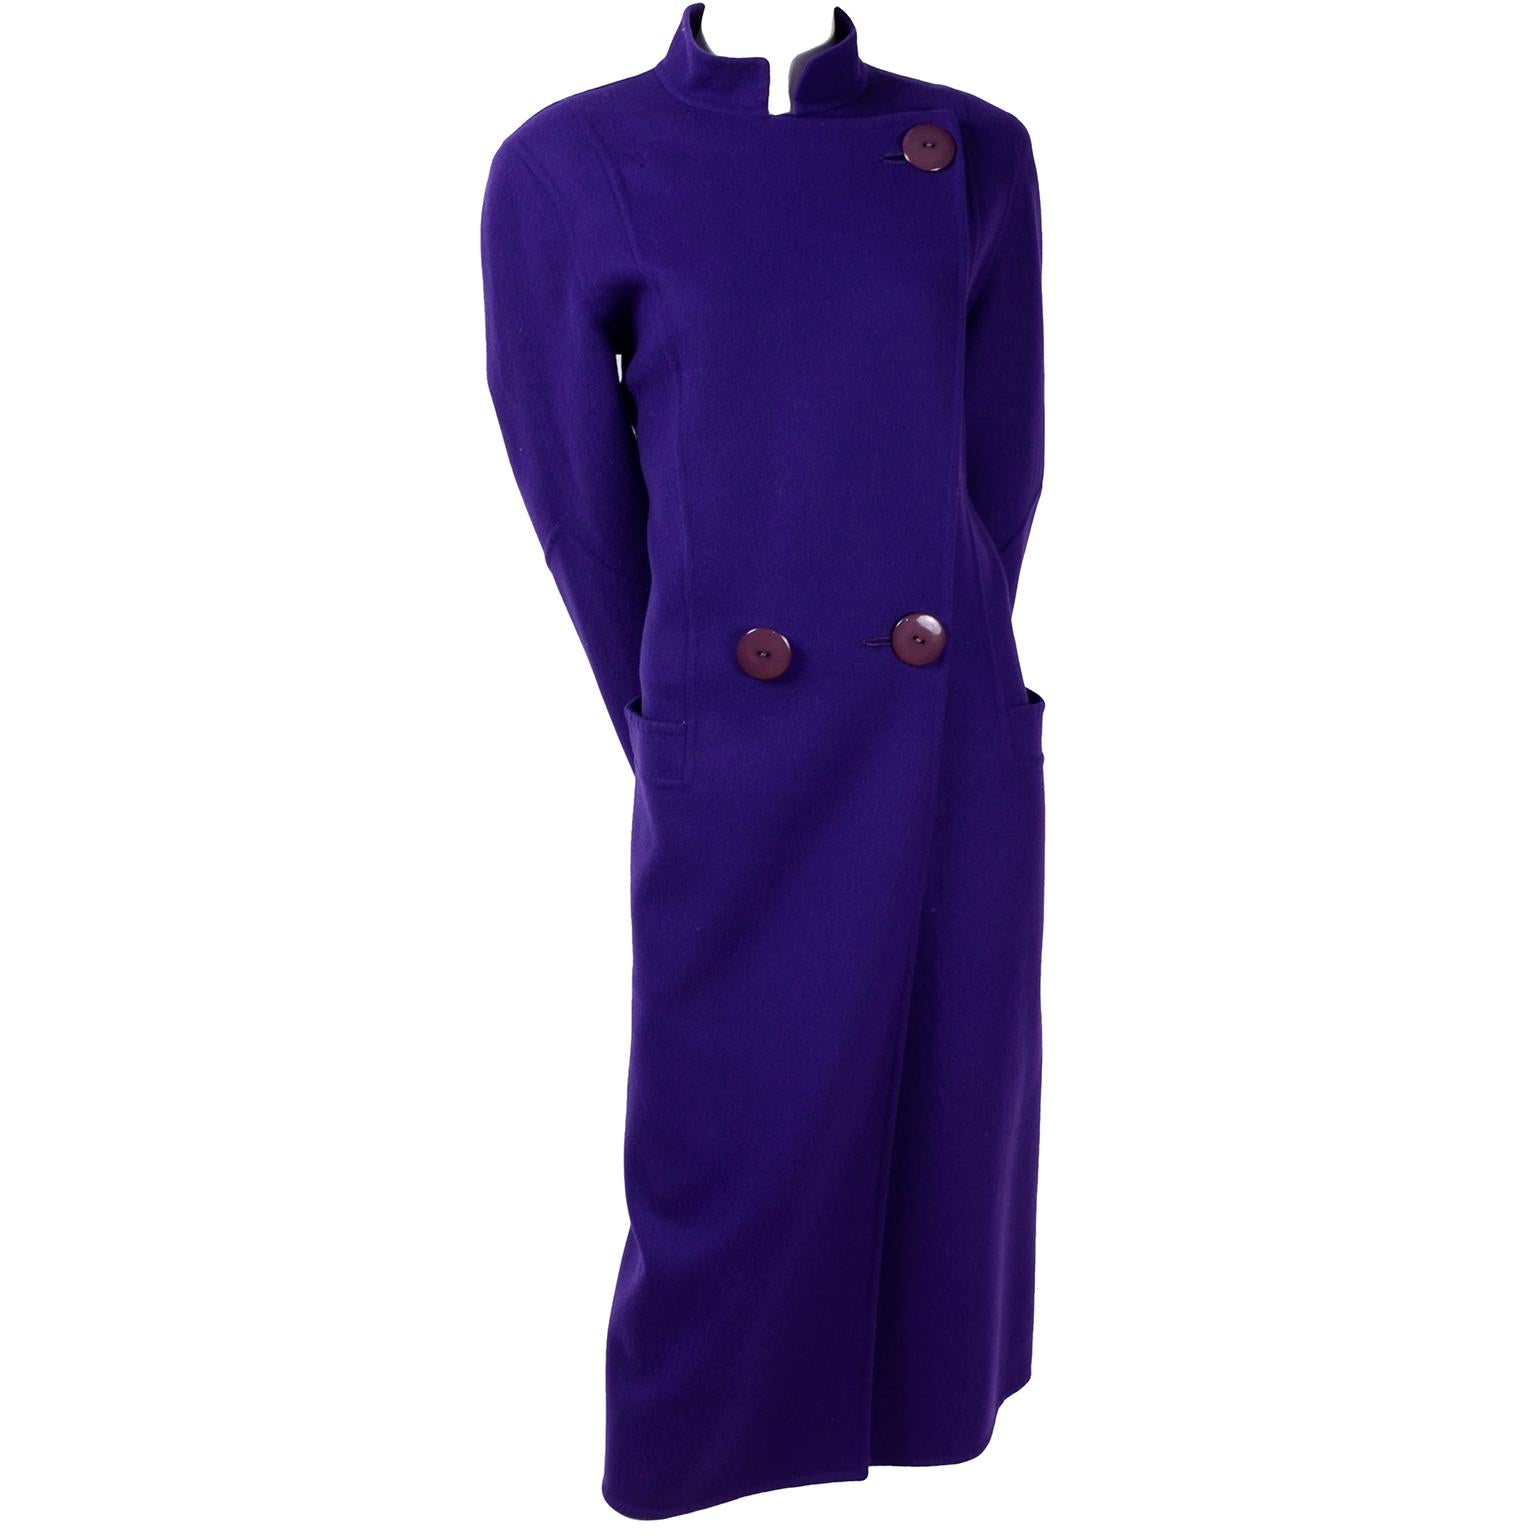 This is a great vintage purple wool coat from Salvatore Ferragamo. The coat can be worn with lapels or with a mandarin collar and it has flap pockets and closes with two large buttons. This wonderful late 1980's or early 1990's coat is in the